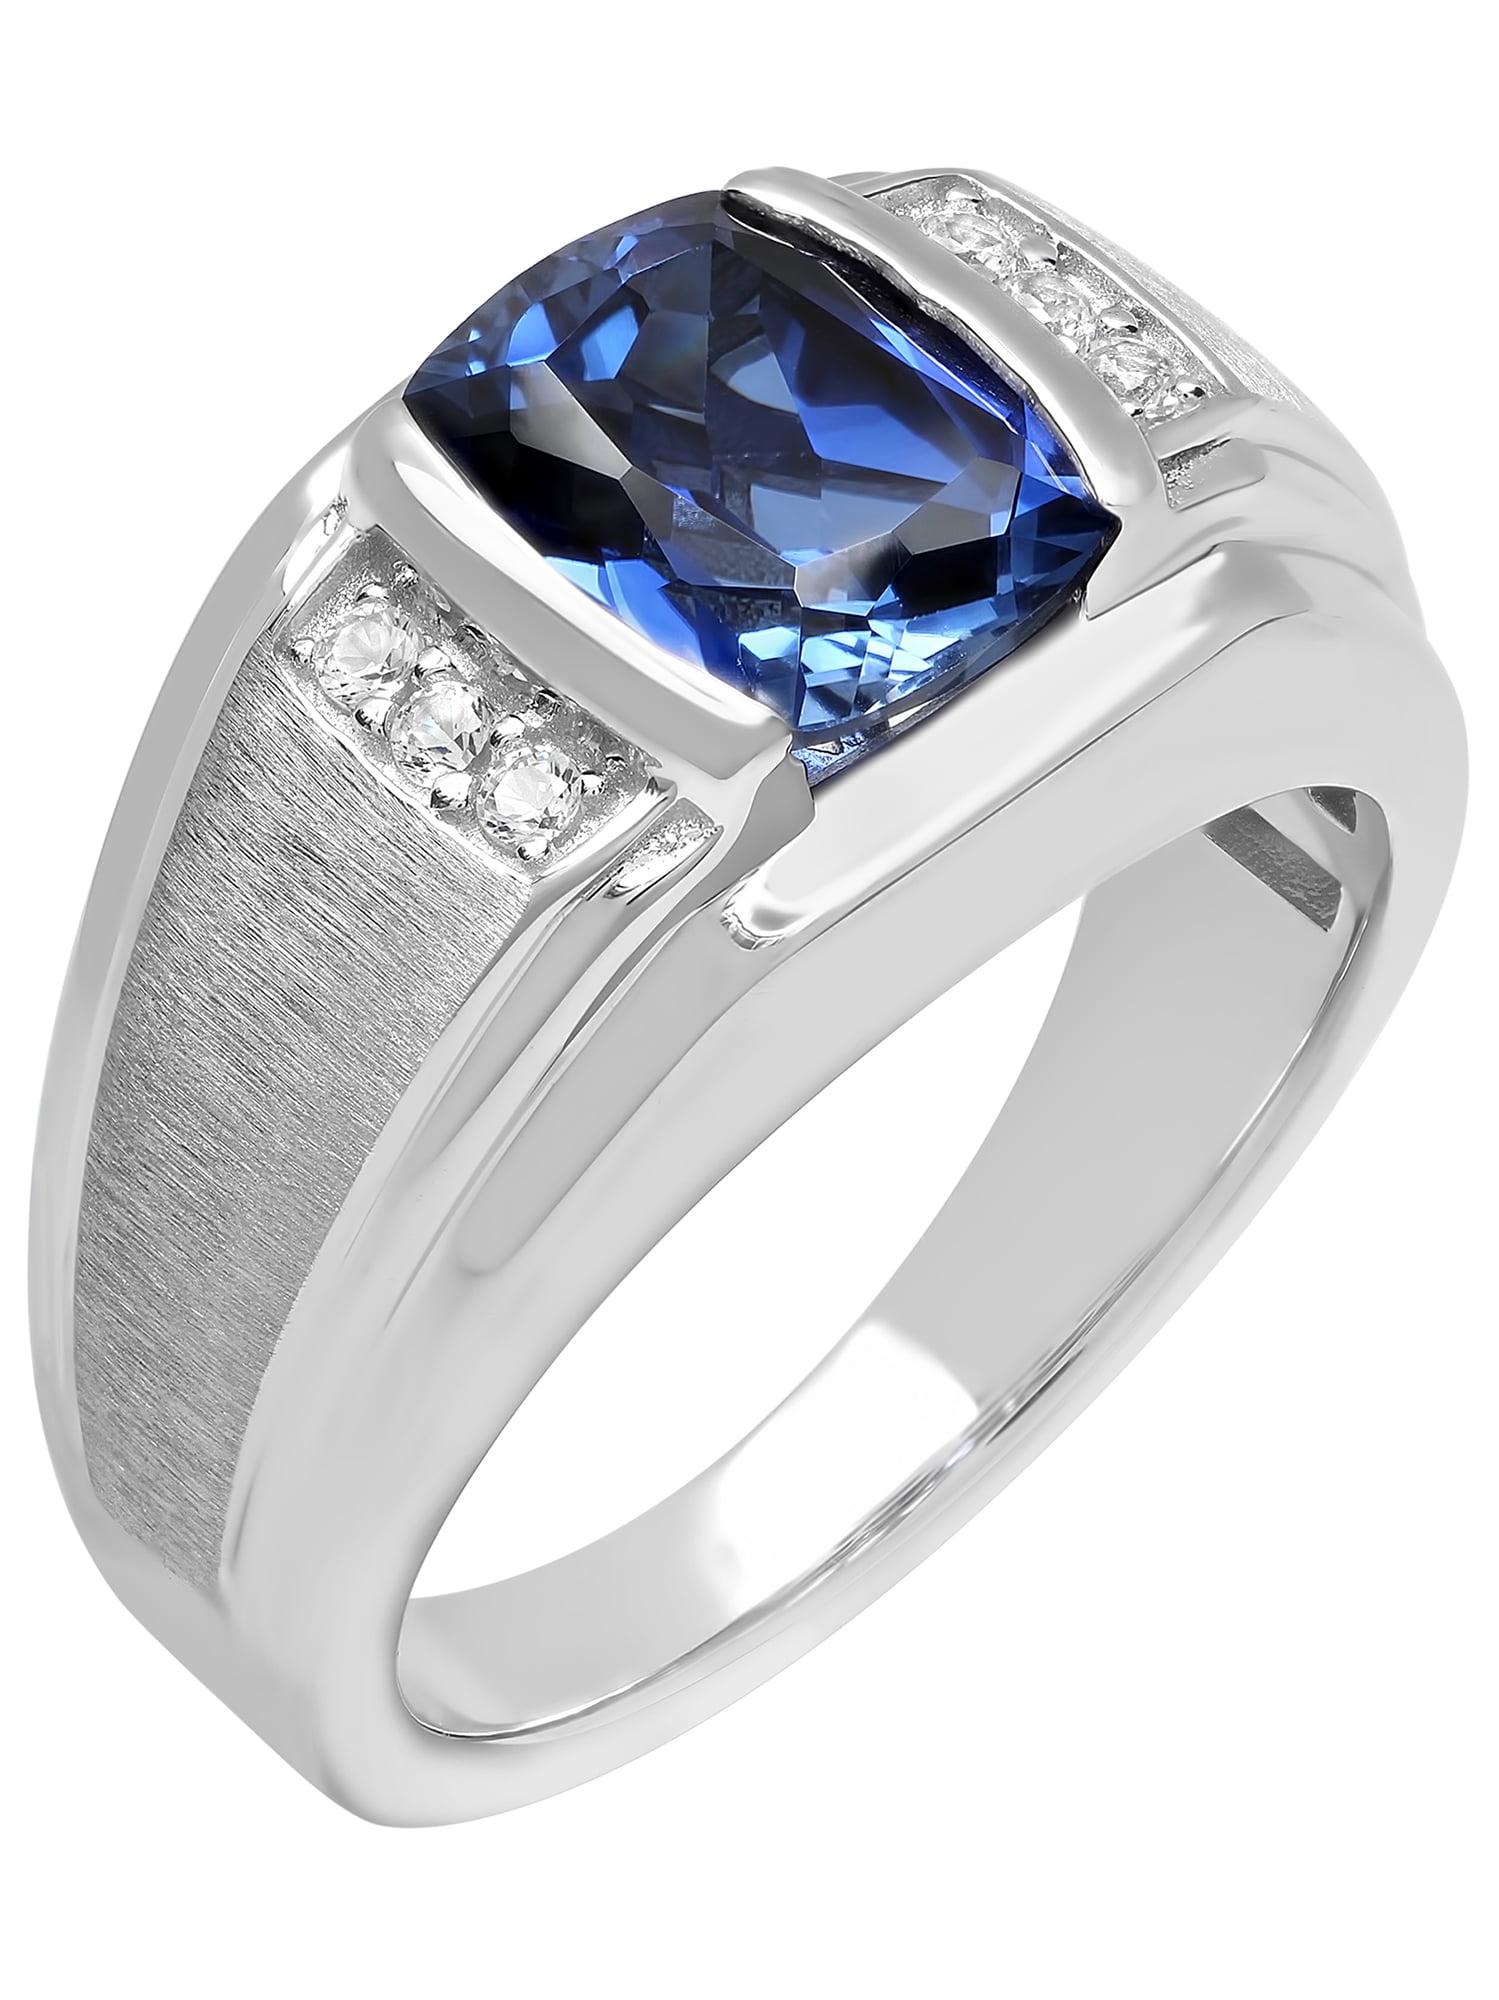 Get the Perfect Men's Sapphire Rings | GLAMIRA.in